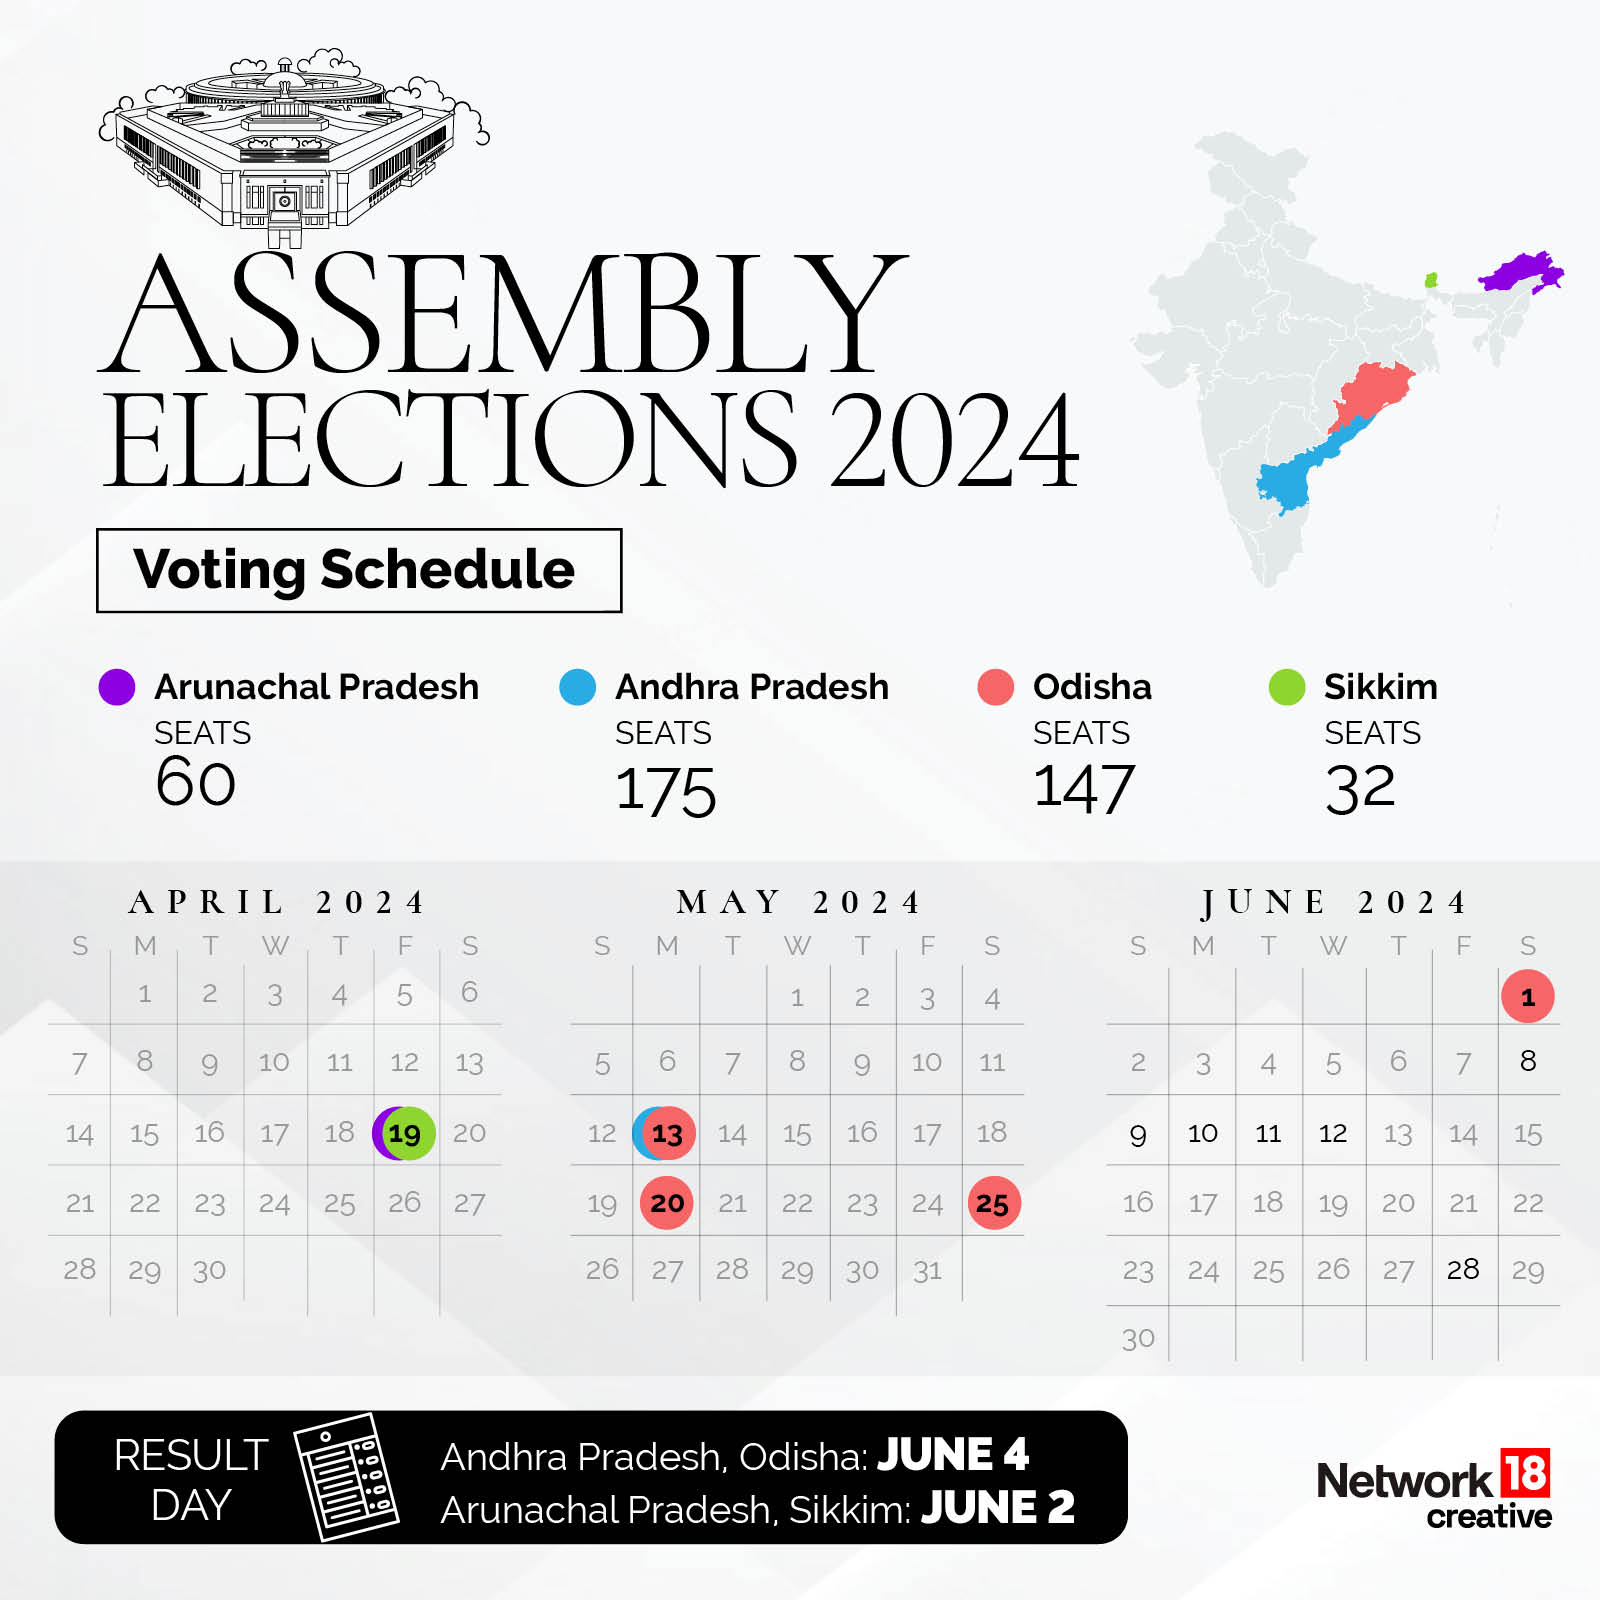 Assembly Elections 2024: Voting Schedule